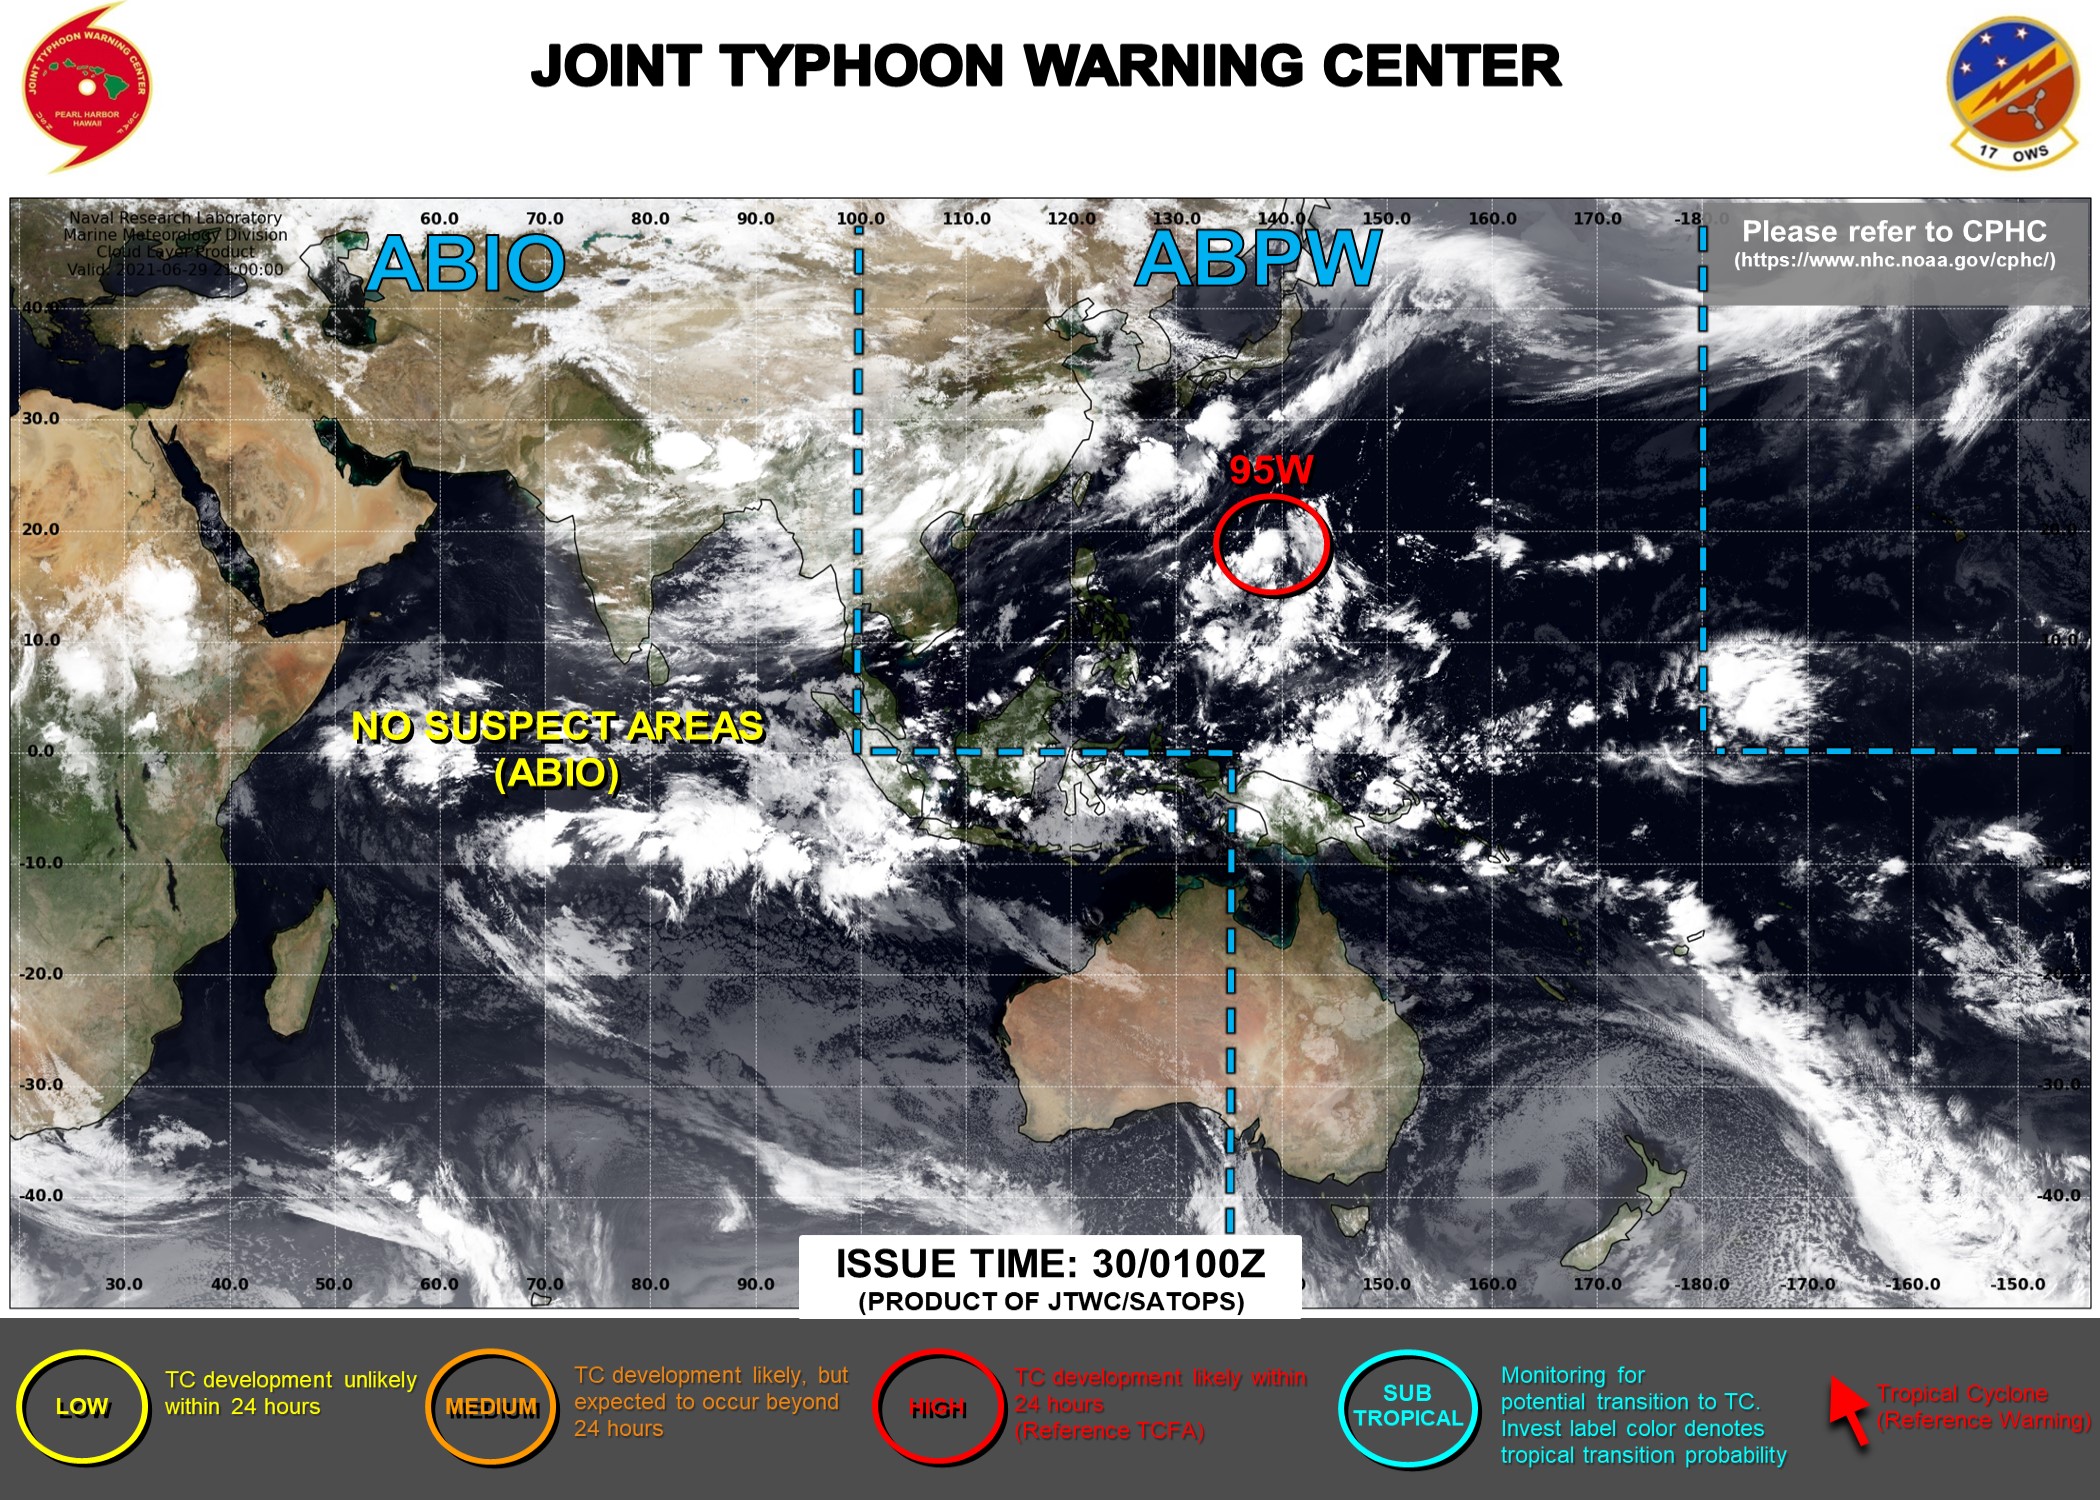 INVEST 95W IS UP-GRADED TO HIGH. 3HOURLY SATELLITE BULLETINS ARE ISSUED BY THE JTWC ON THIS SYSTEM.